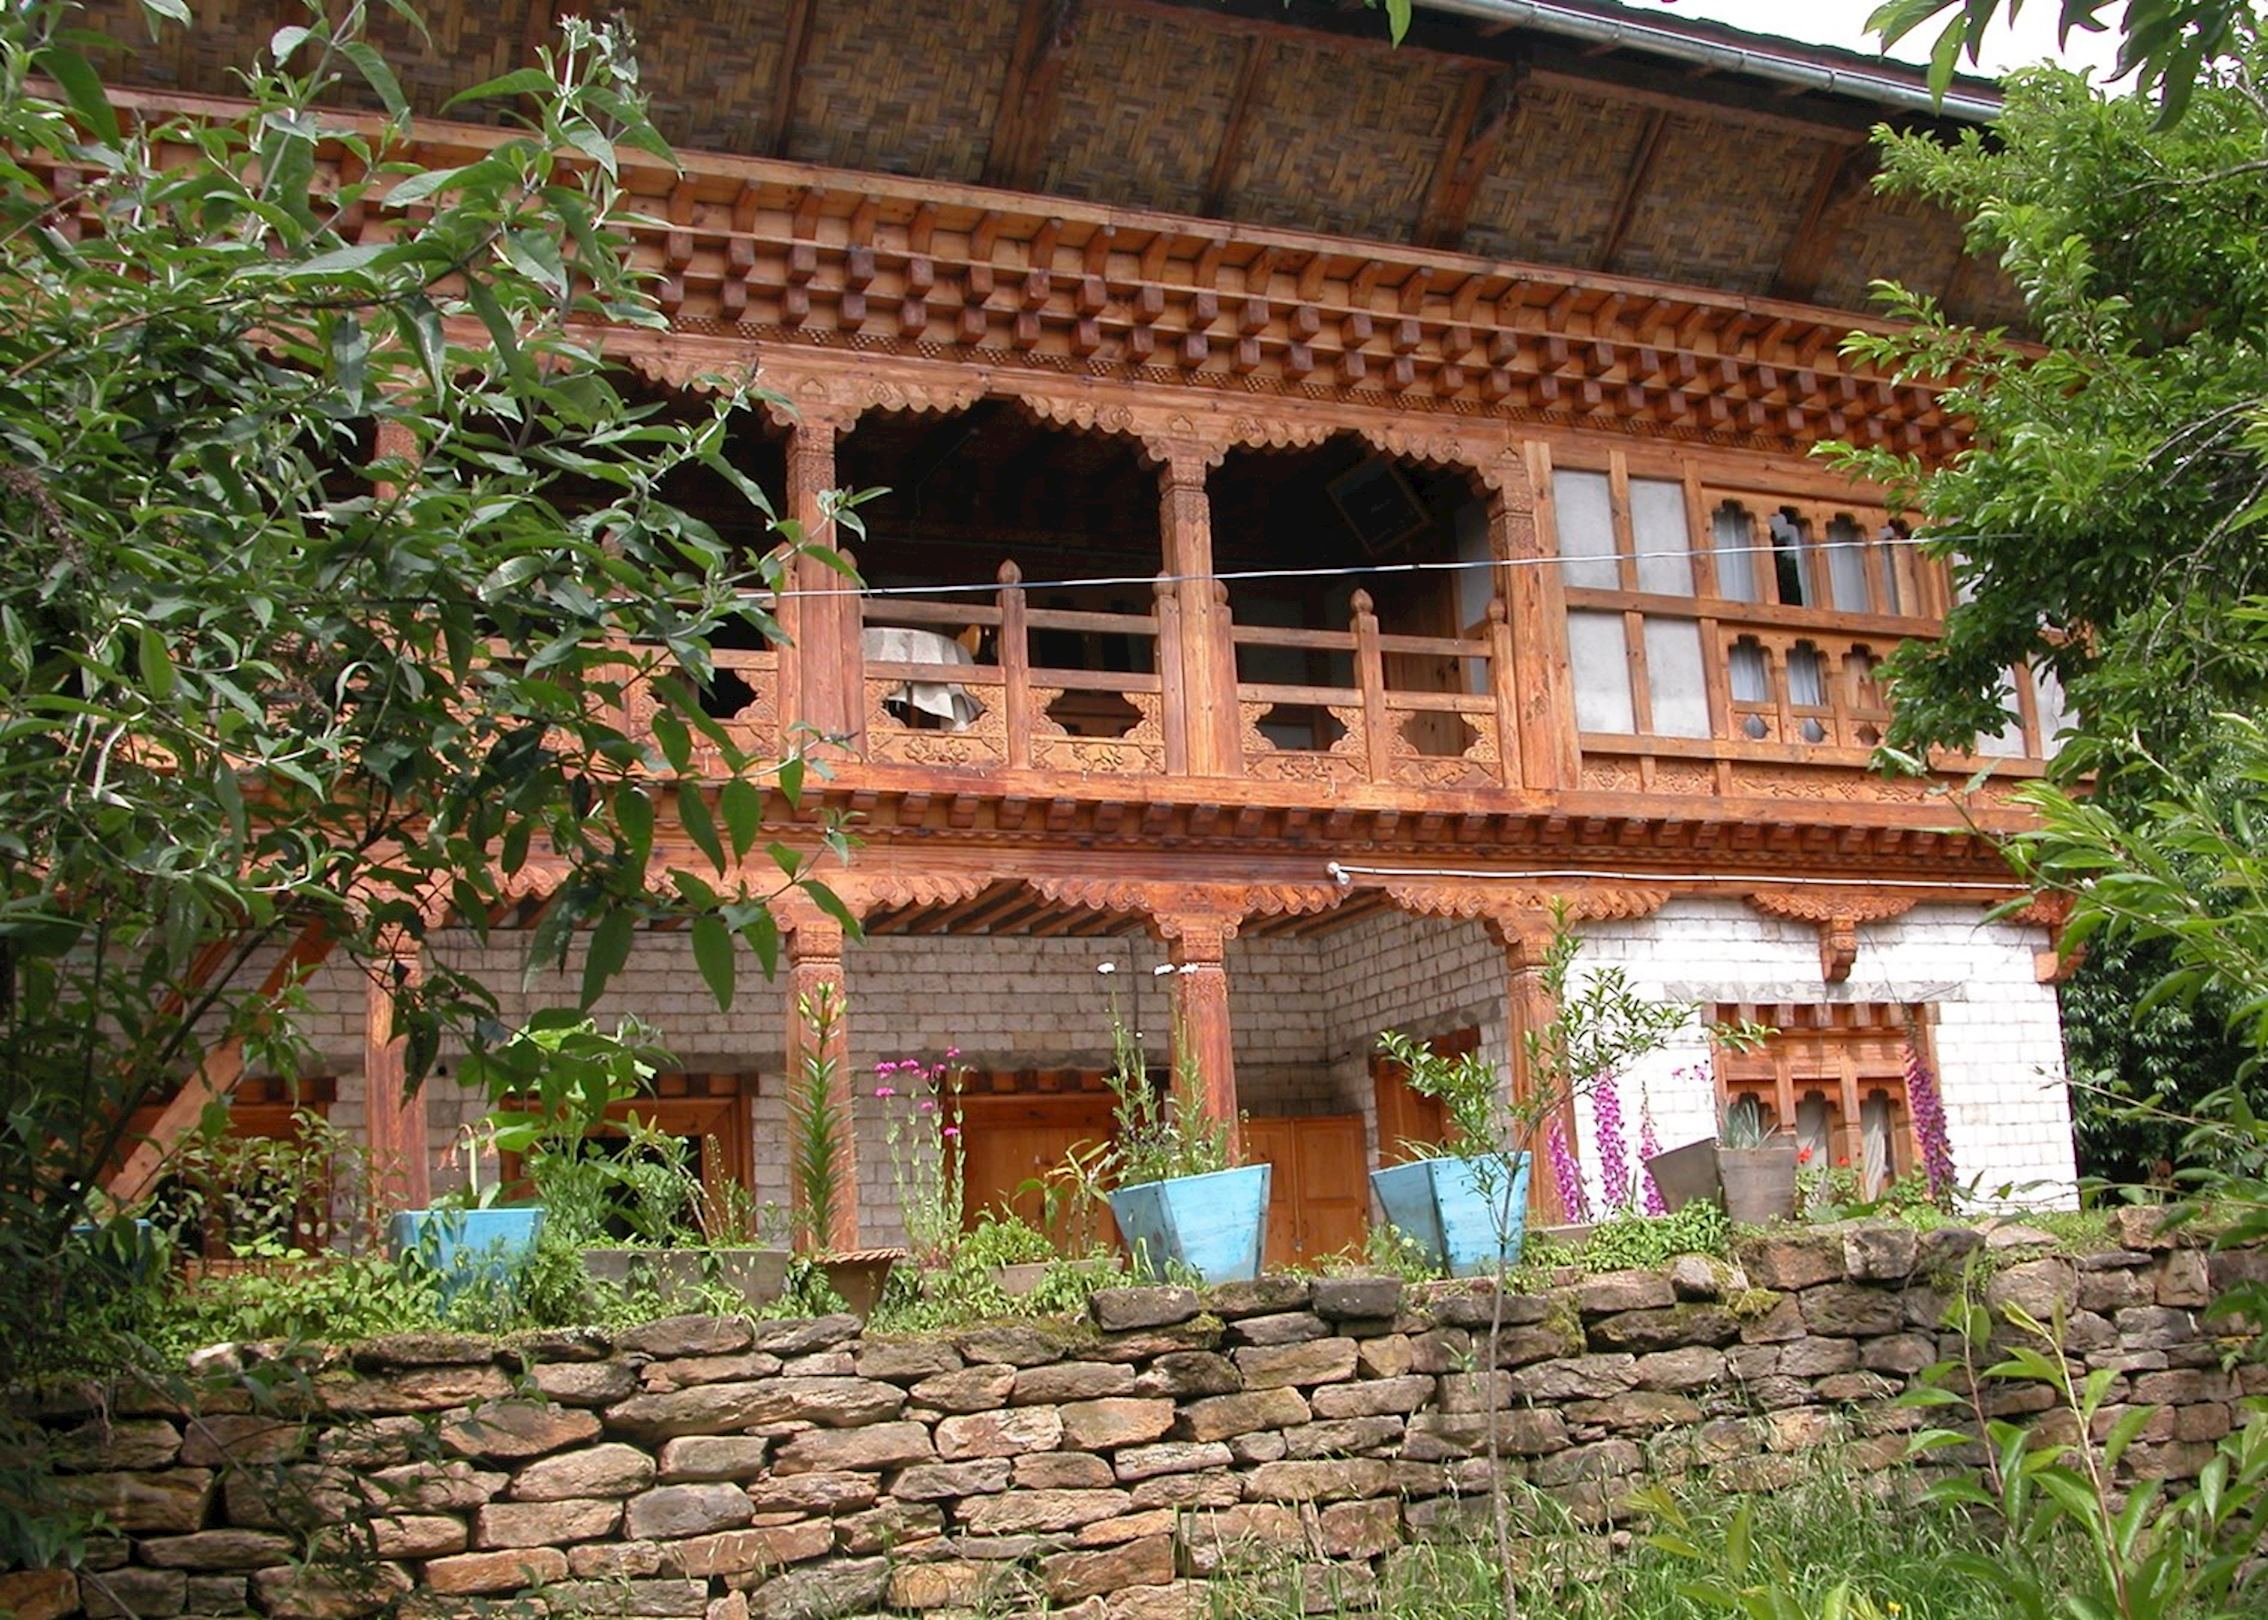 Hotels in Bumthang : Experience peace and luxury